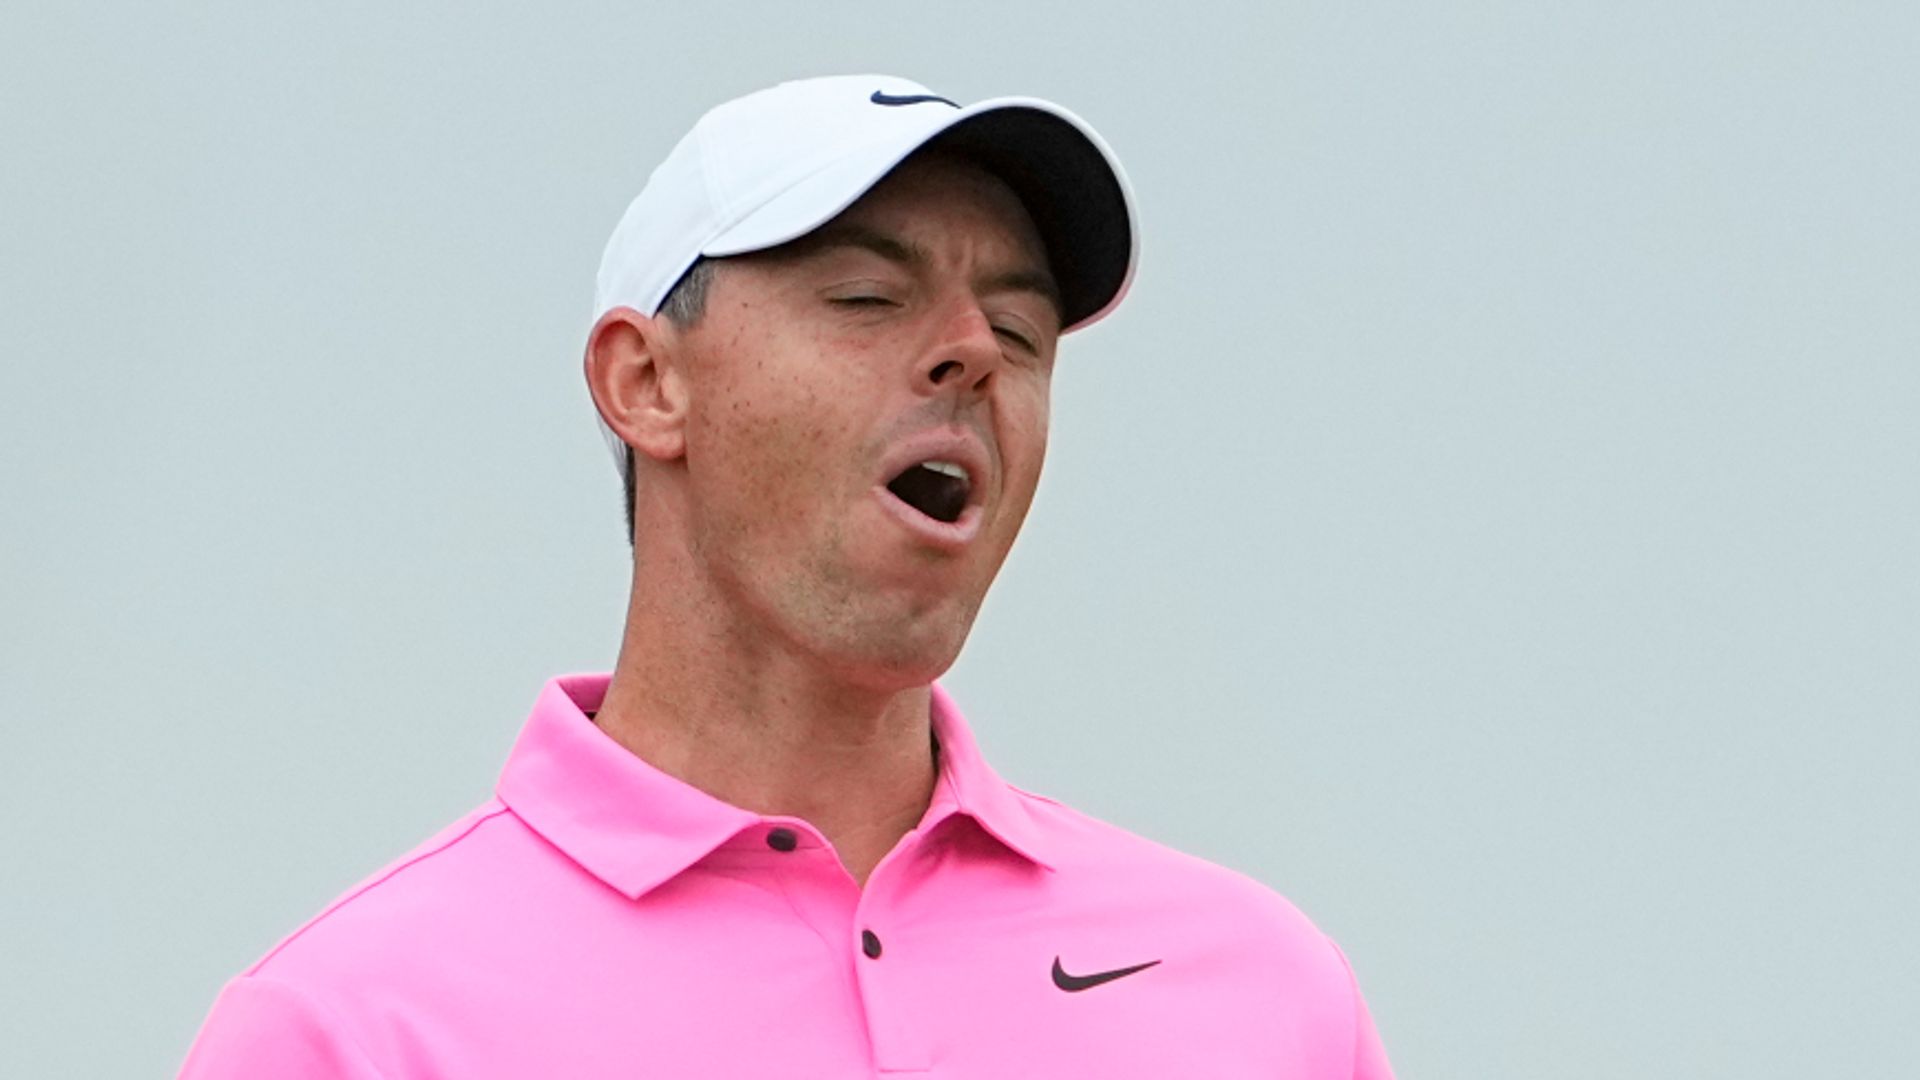 McIlroy: No one wants me to win another major more than I do!